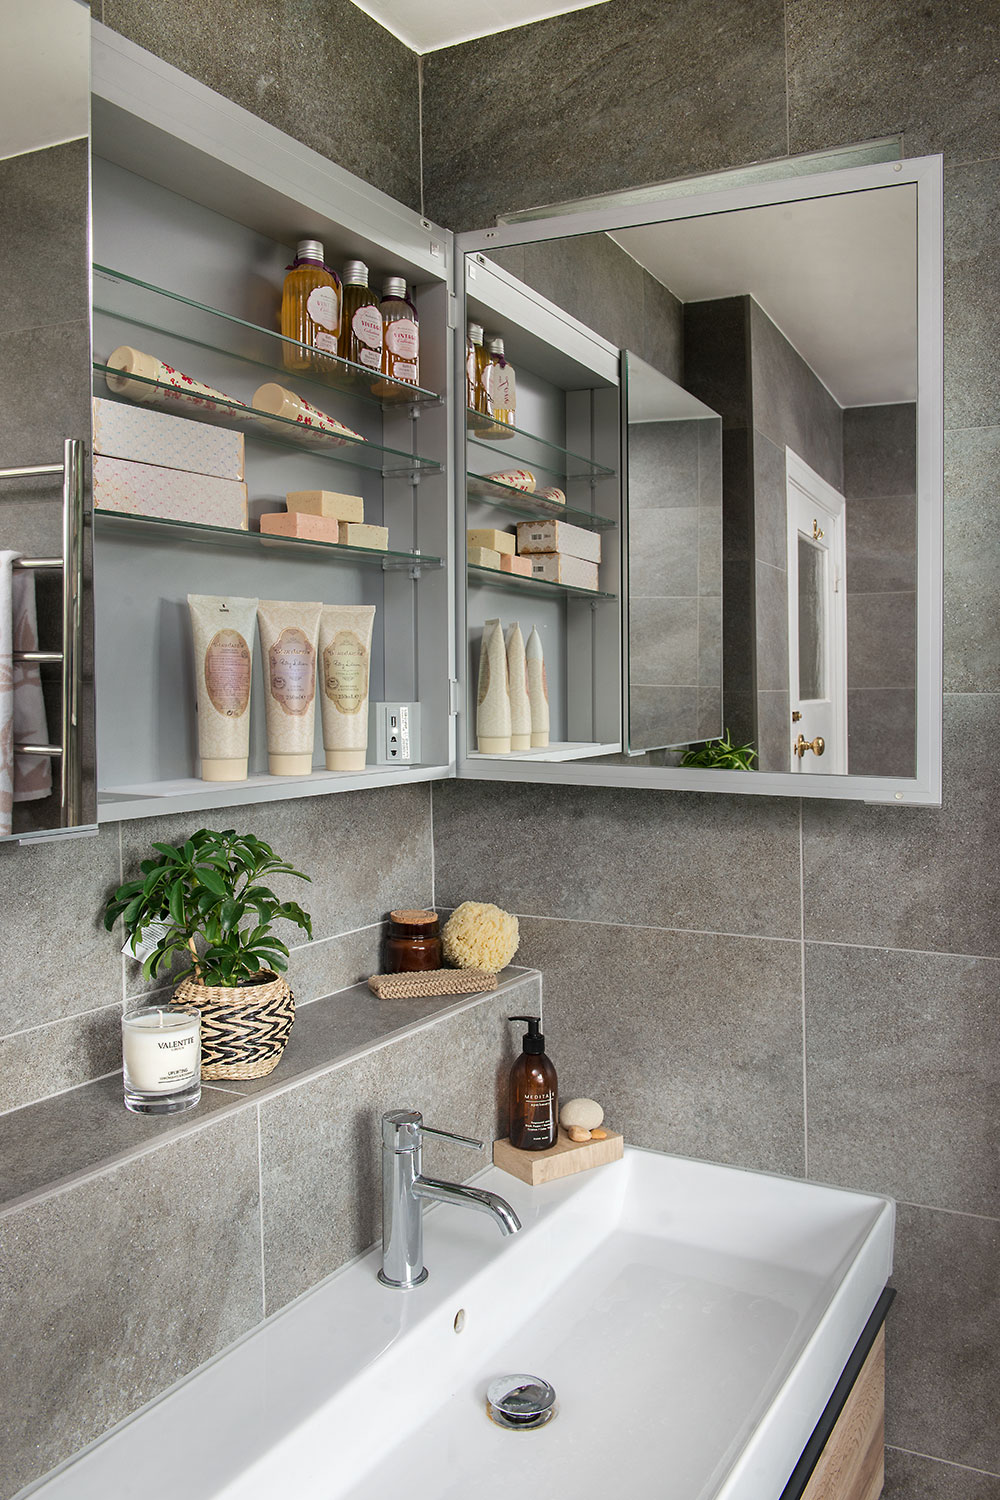 Practical storage solutions for the bathroom.